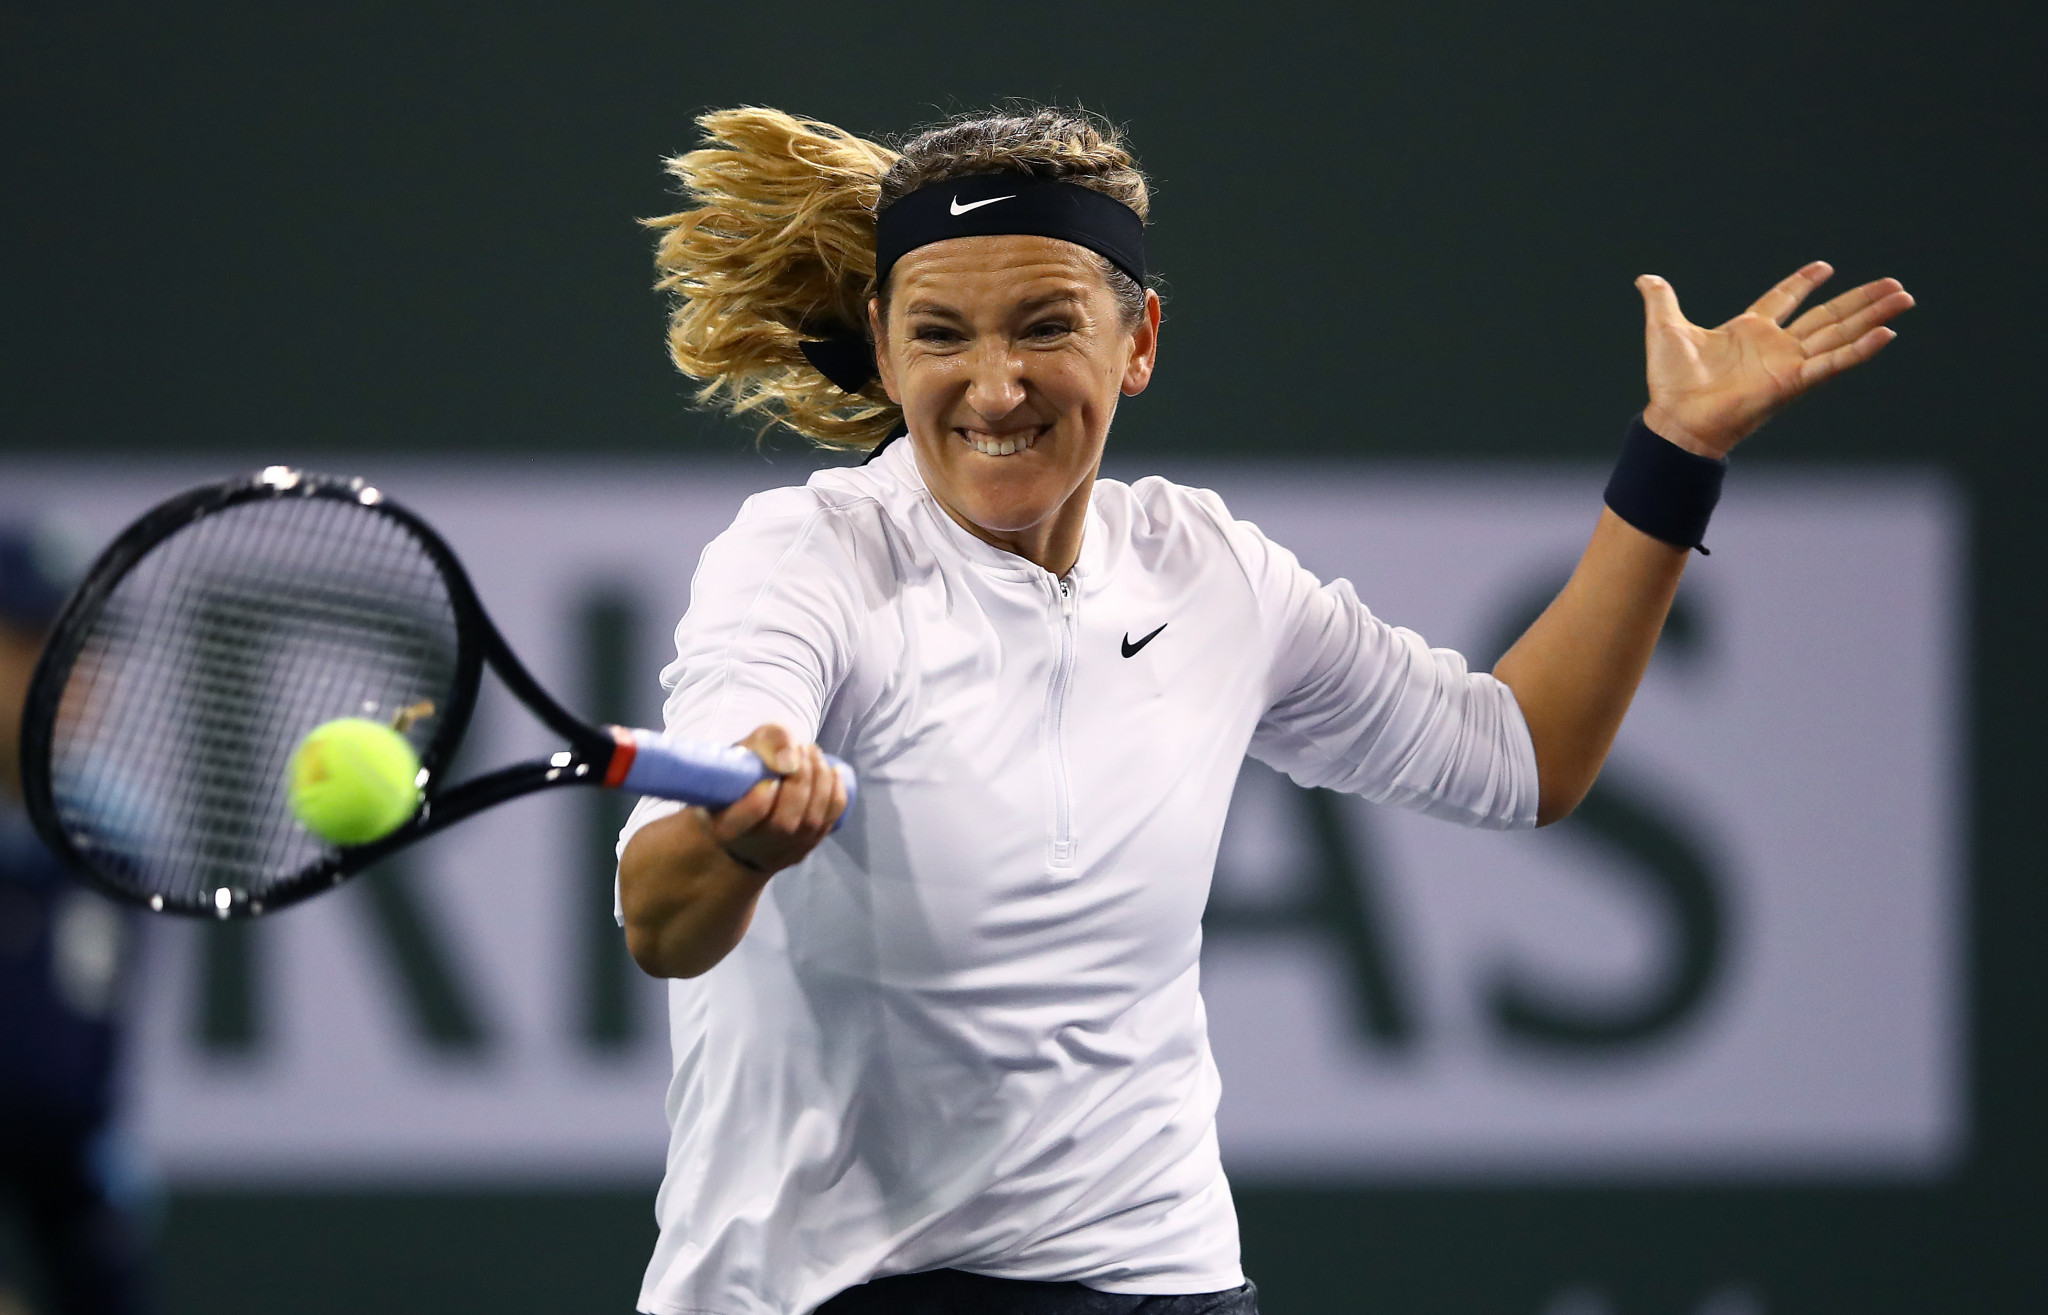 Former world number one Victoria Azarenka beat fellow Belarusian Vera Lapko today at the Women's Tennis Association Premier Mandatory event in Indian Wells ©Getty Images